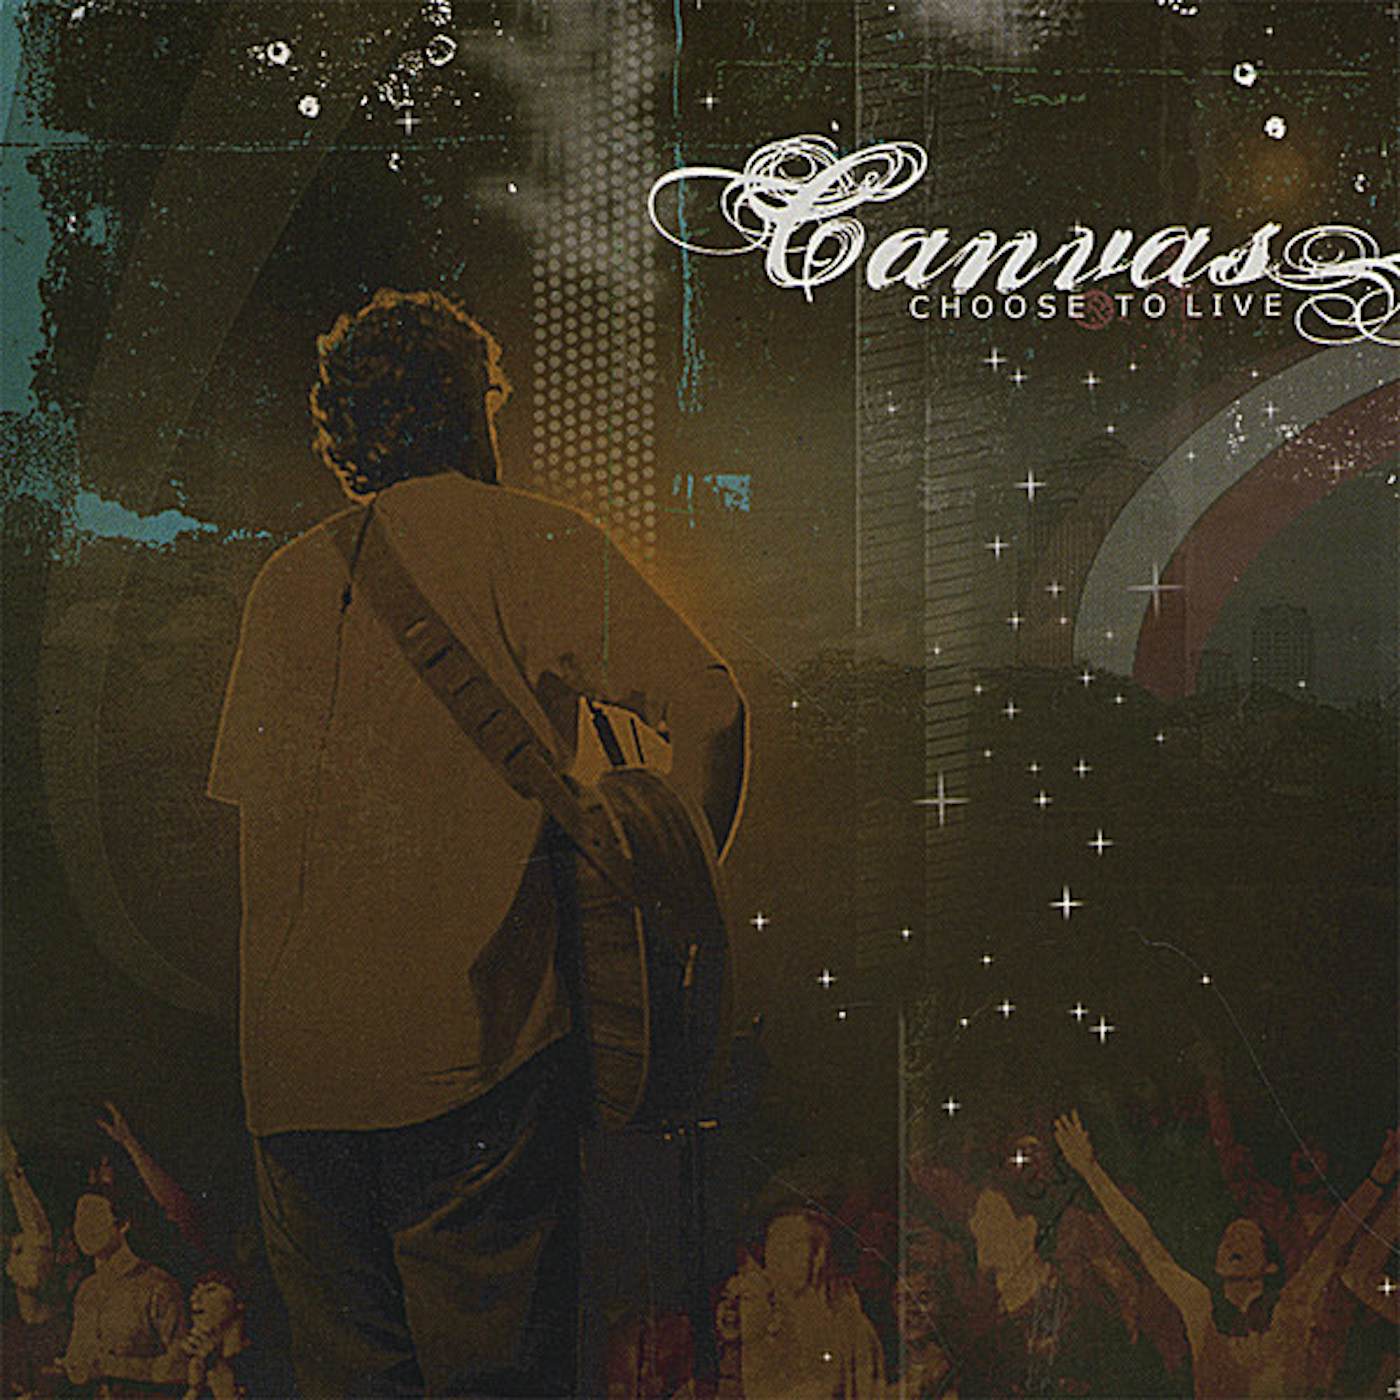 CANVAS CHOOSE TO LIVE CD